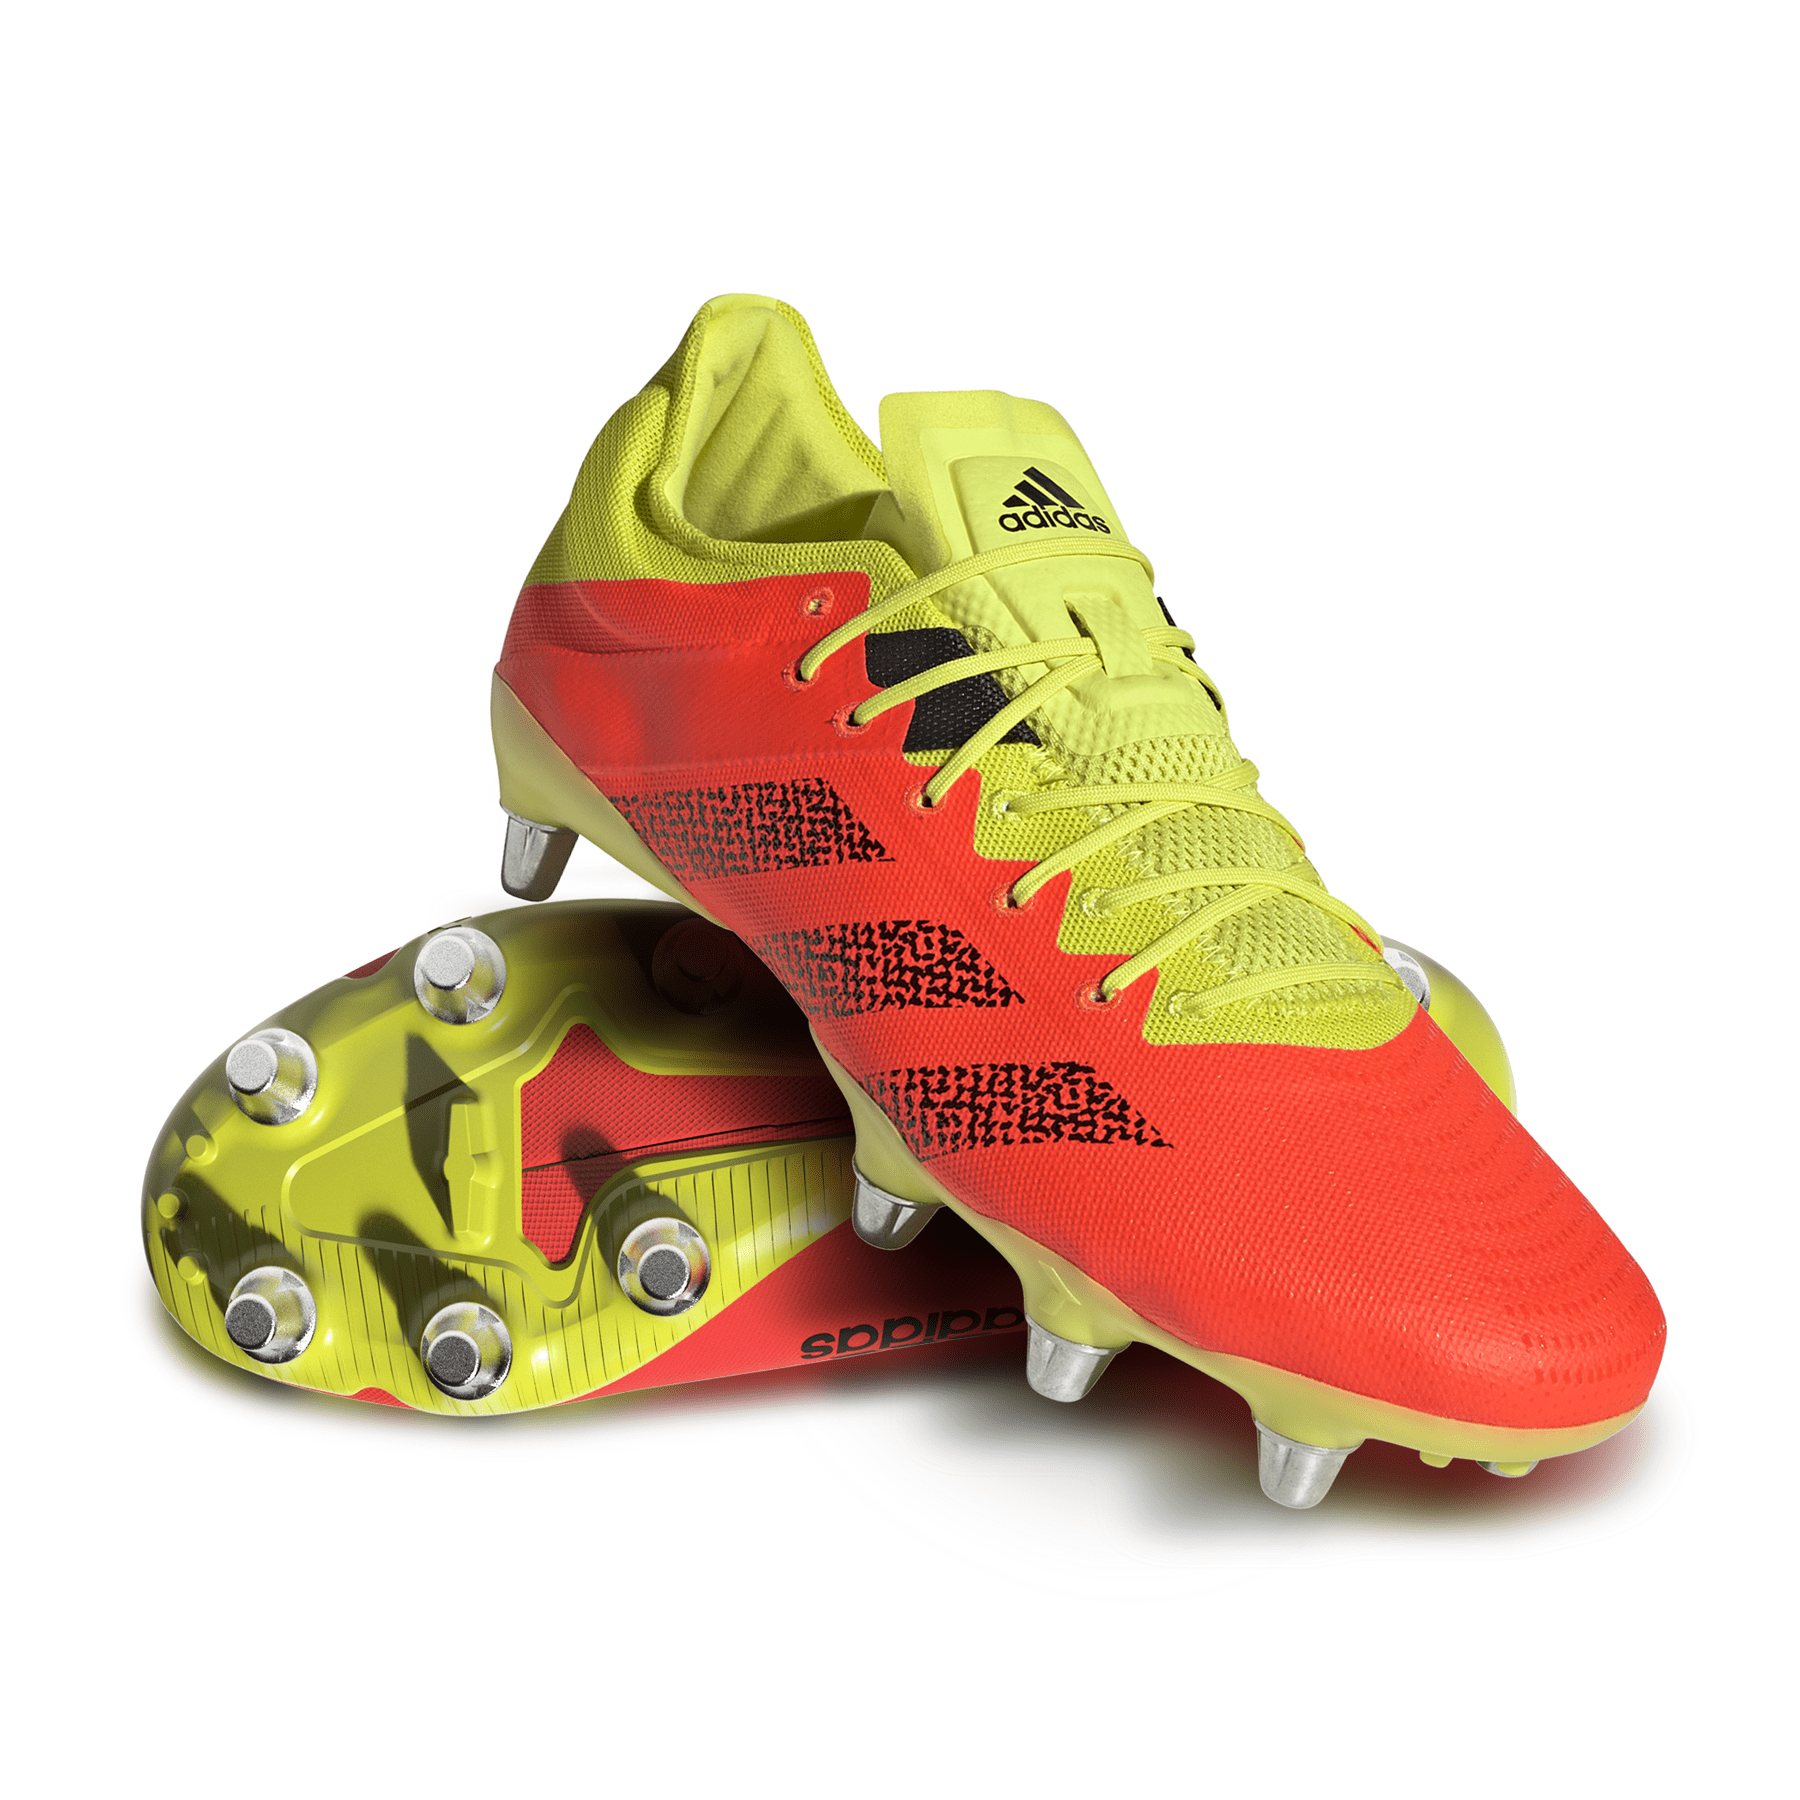 adidas Kakari Z.0 SG Rugby Boots - World Rugby